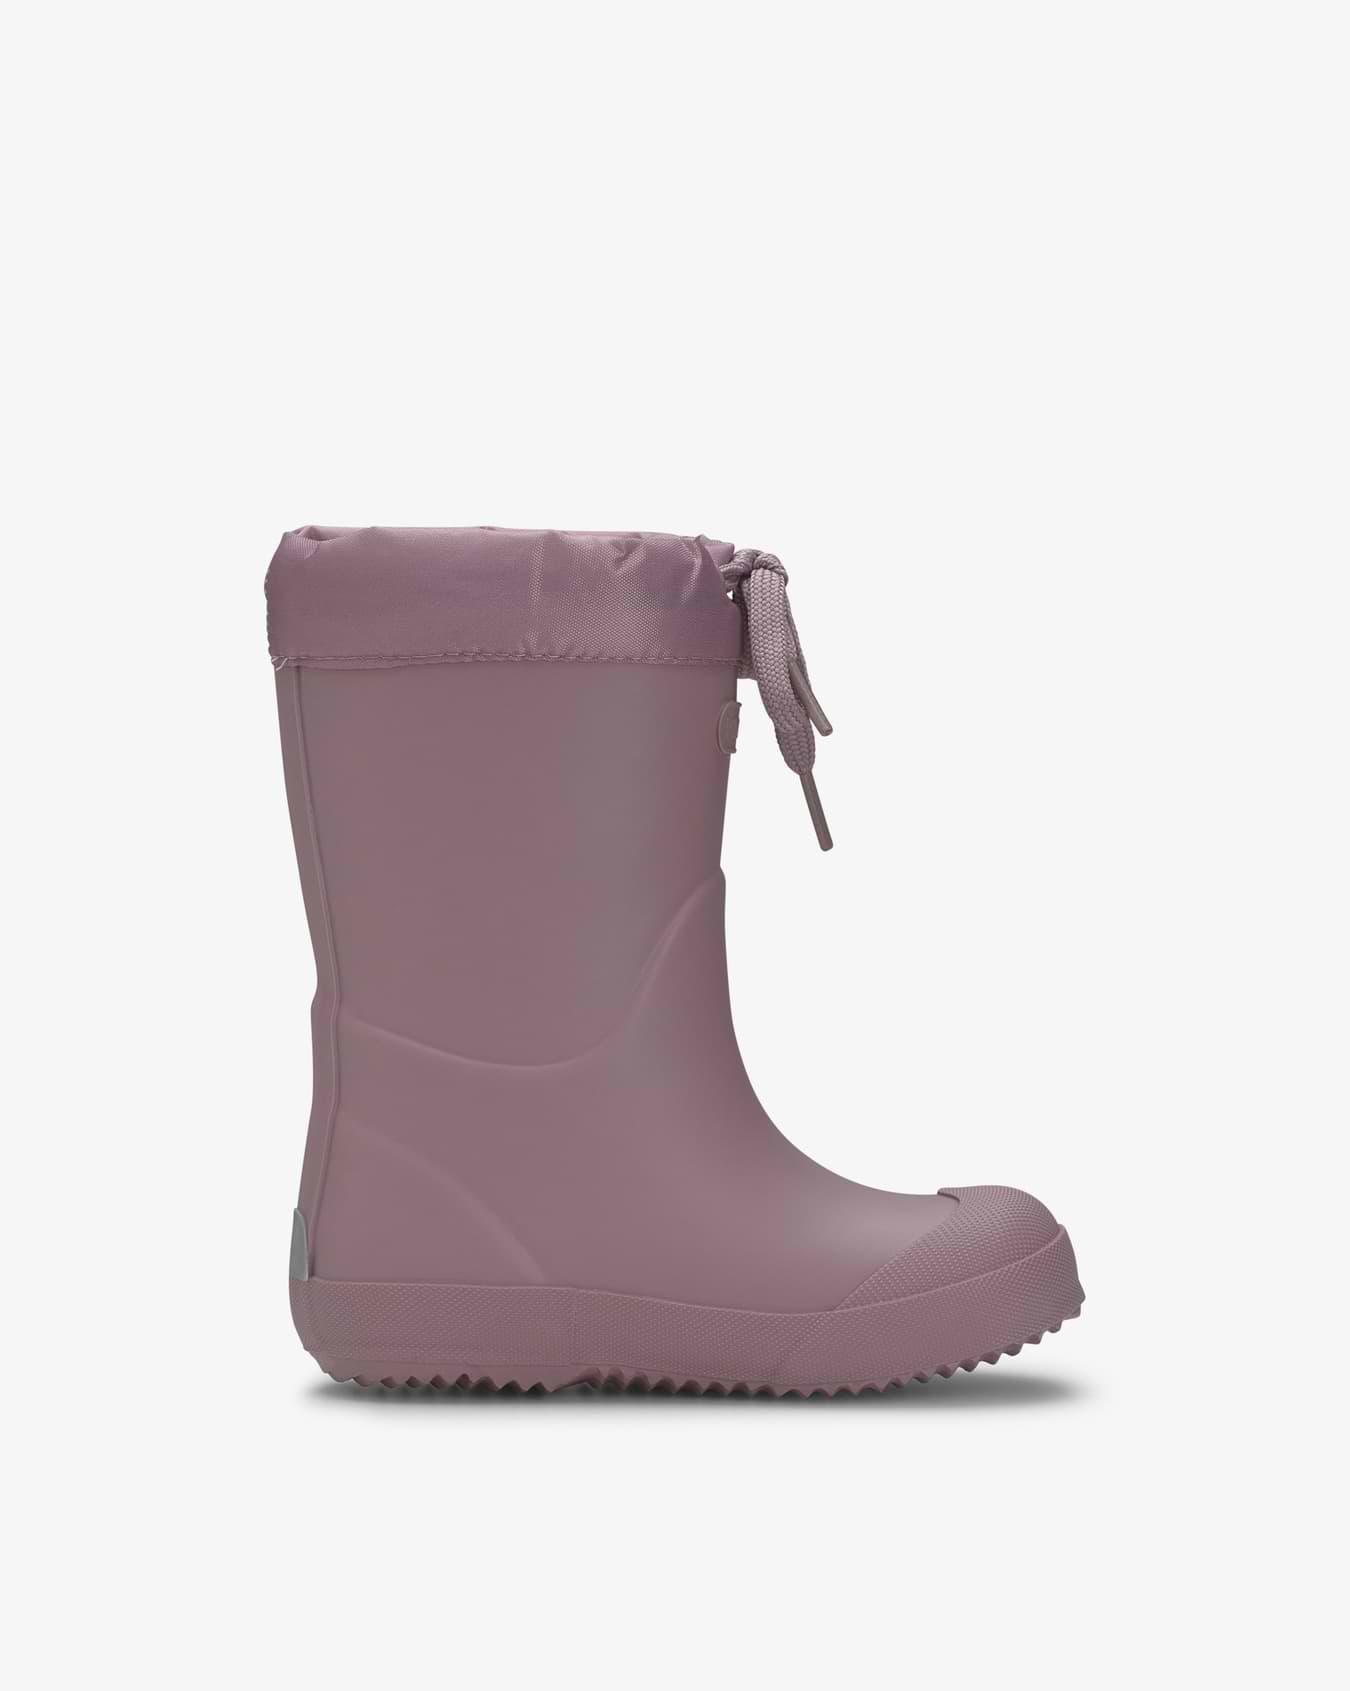 Indie Warm Dusty Pink Rubber Boot